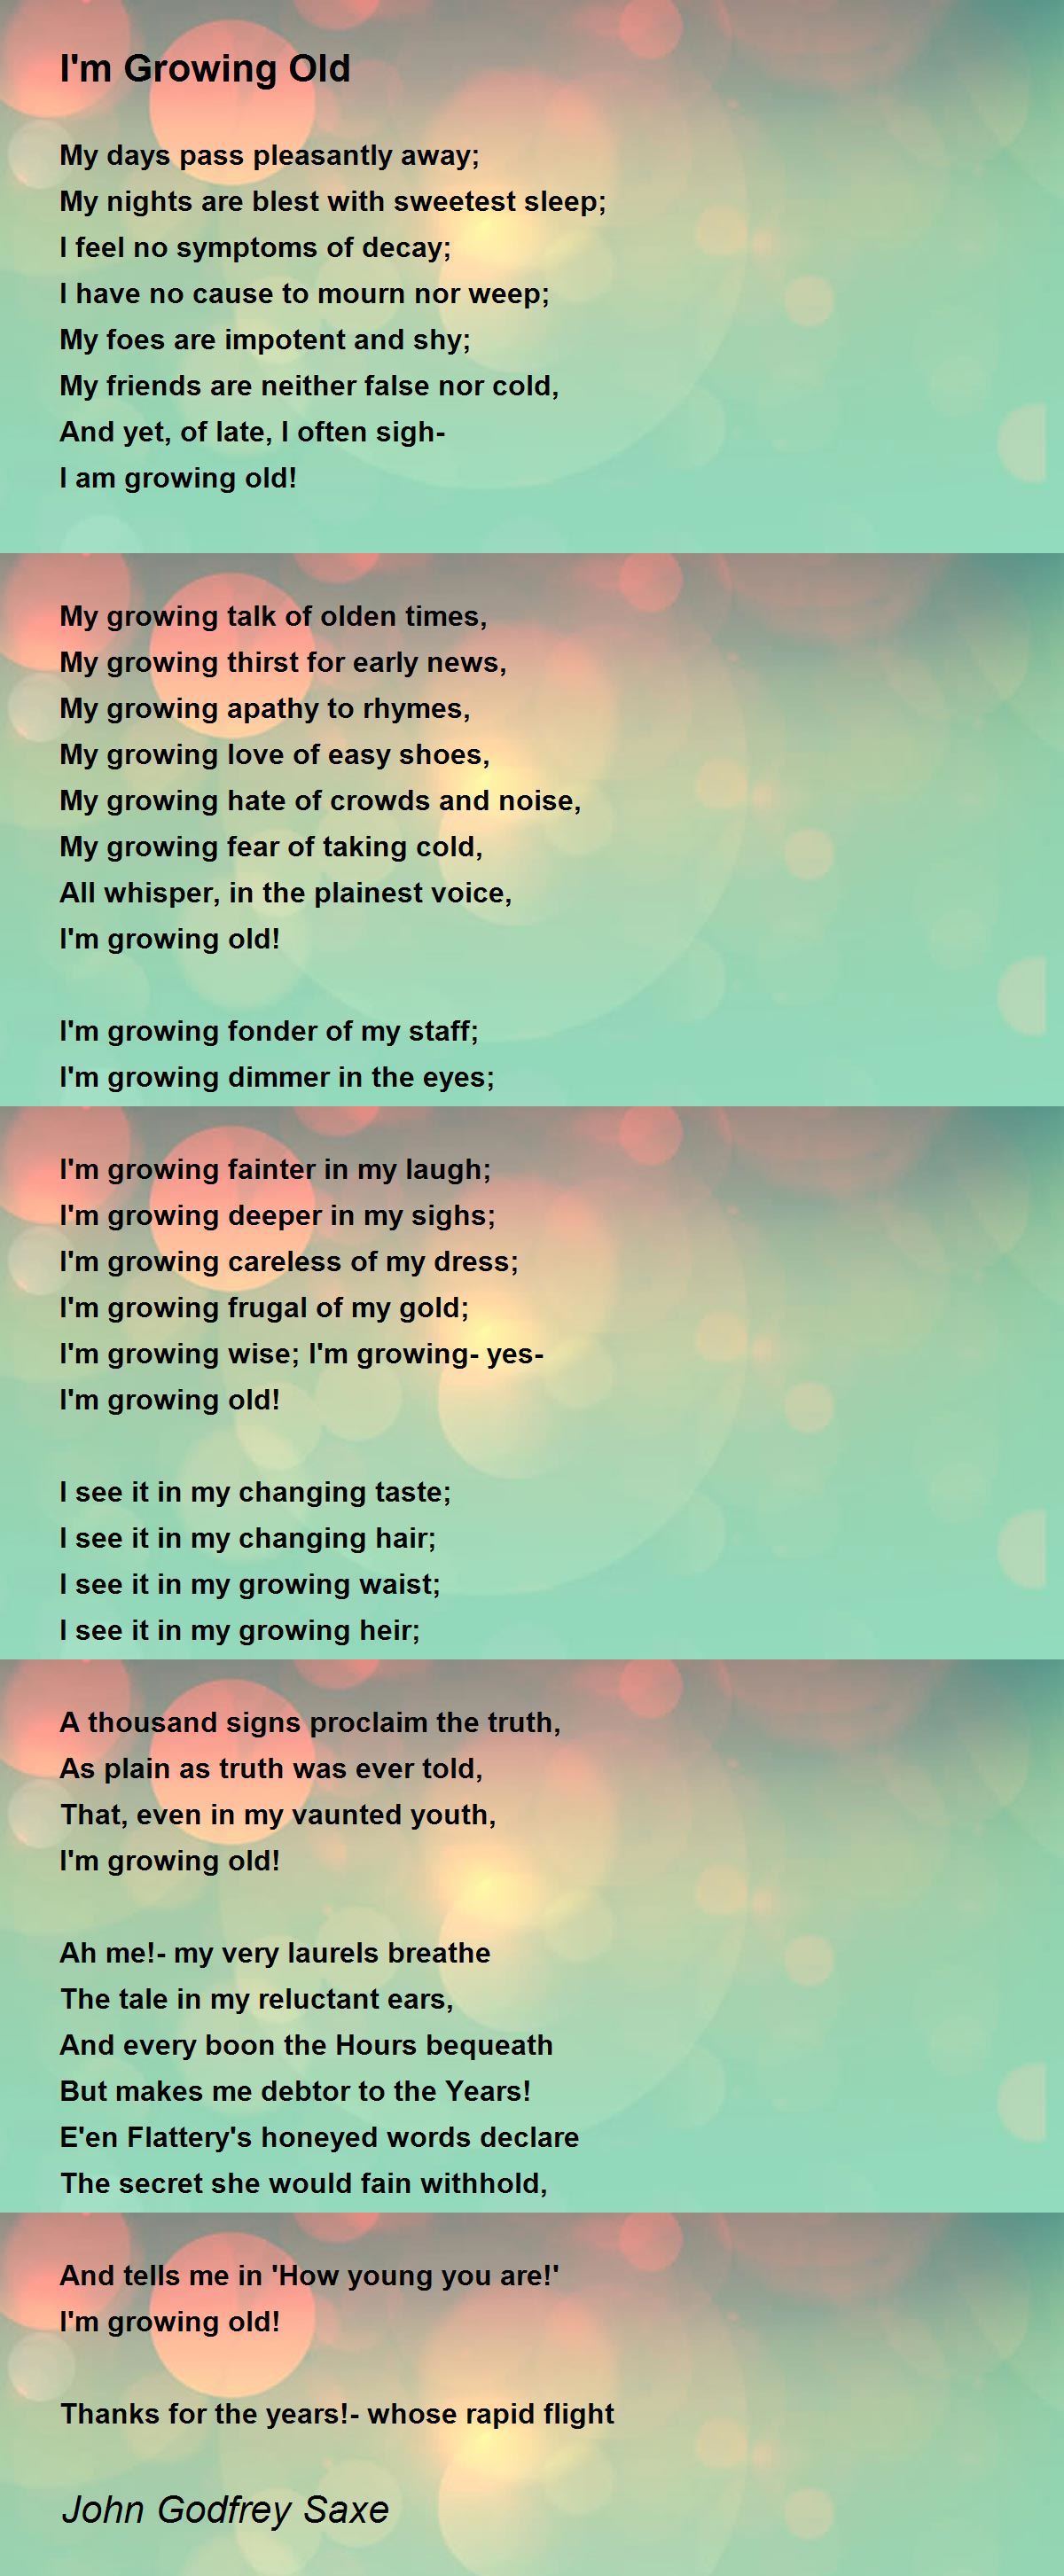 I'm Growing Old - I'm Growing Old Poem by John Godfrey Saxe